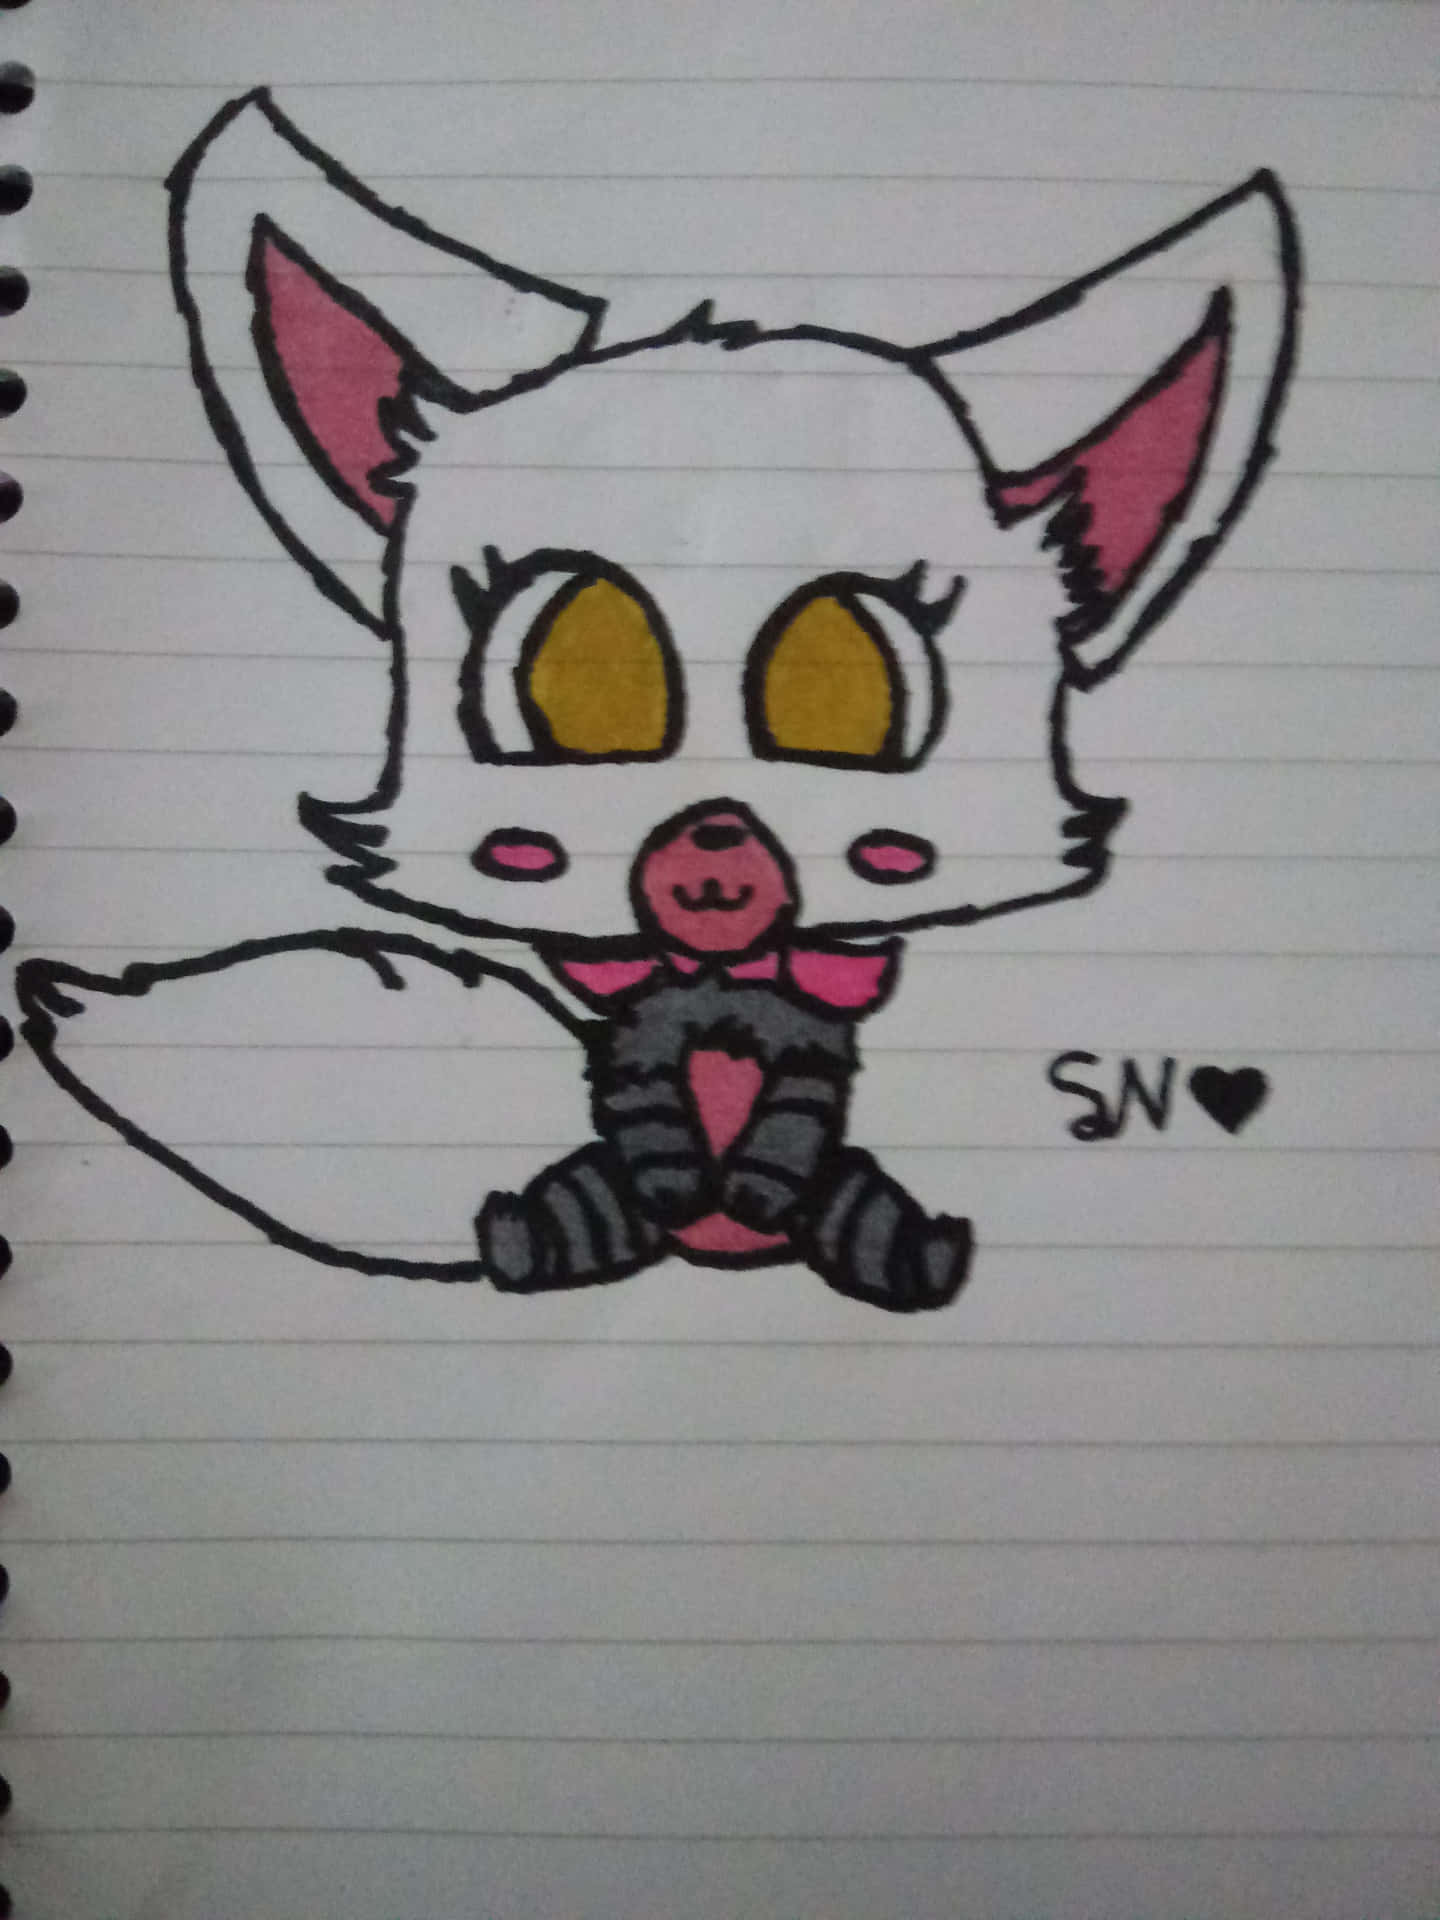 A Drawing Of A Fox With Pink Eyes And A Bow Background